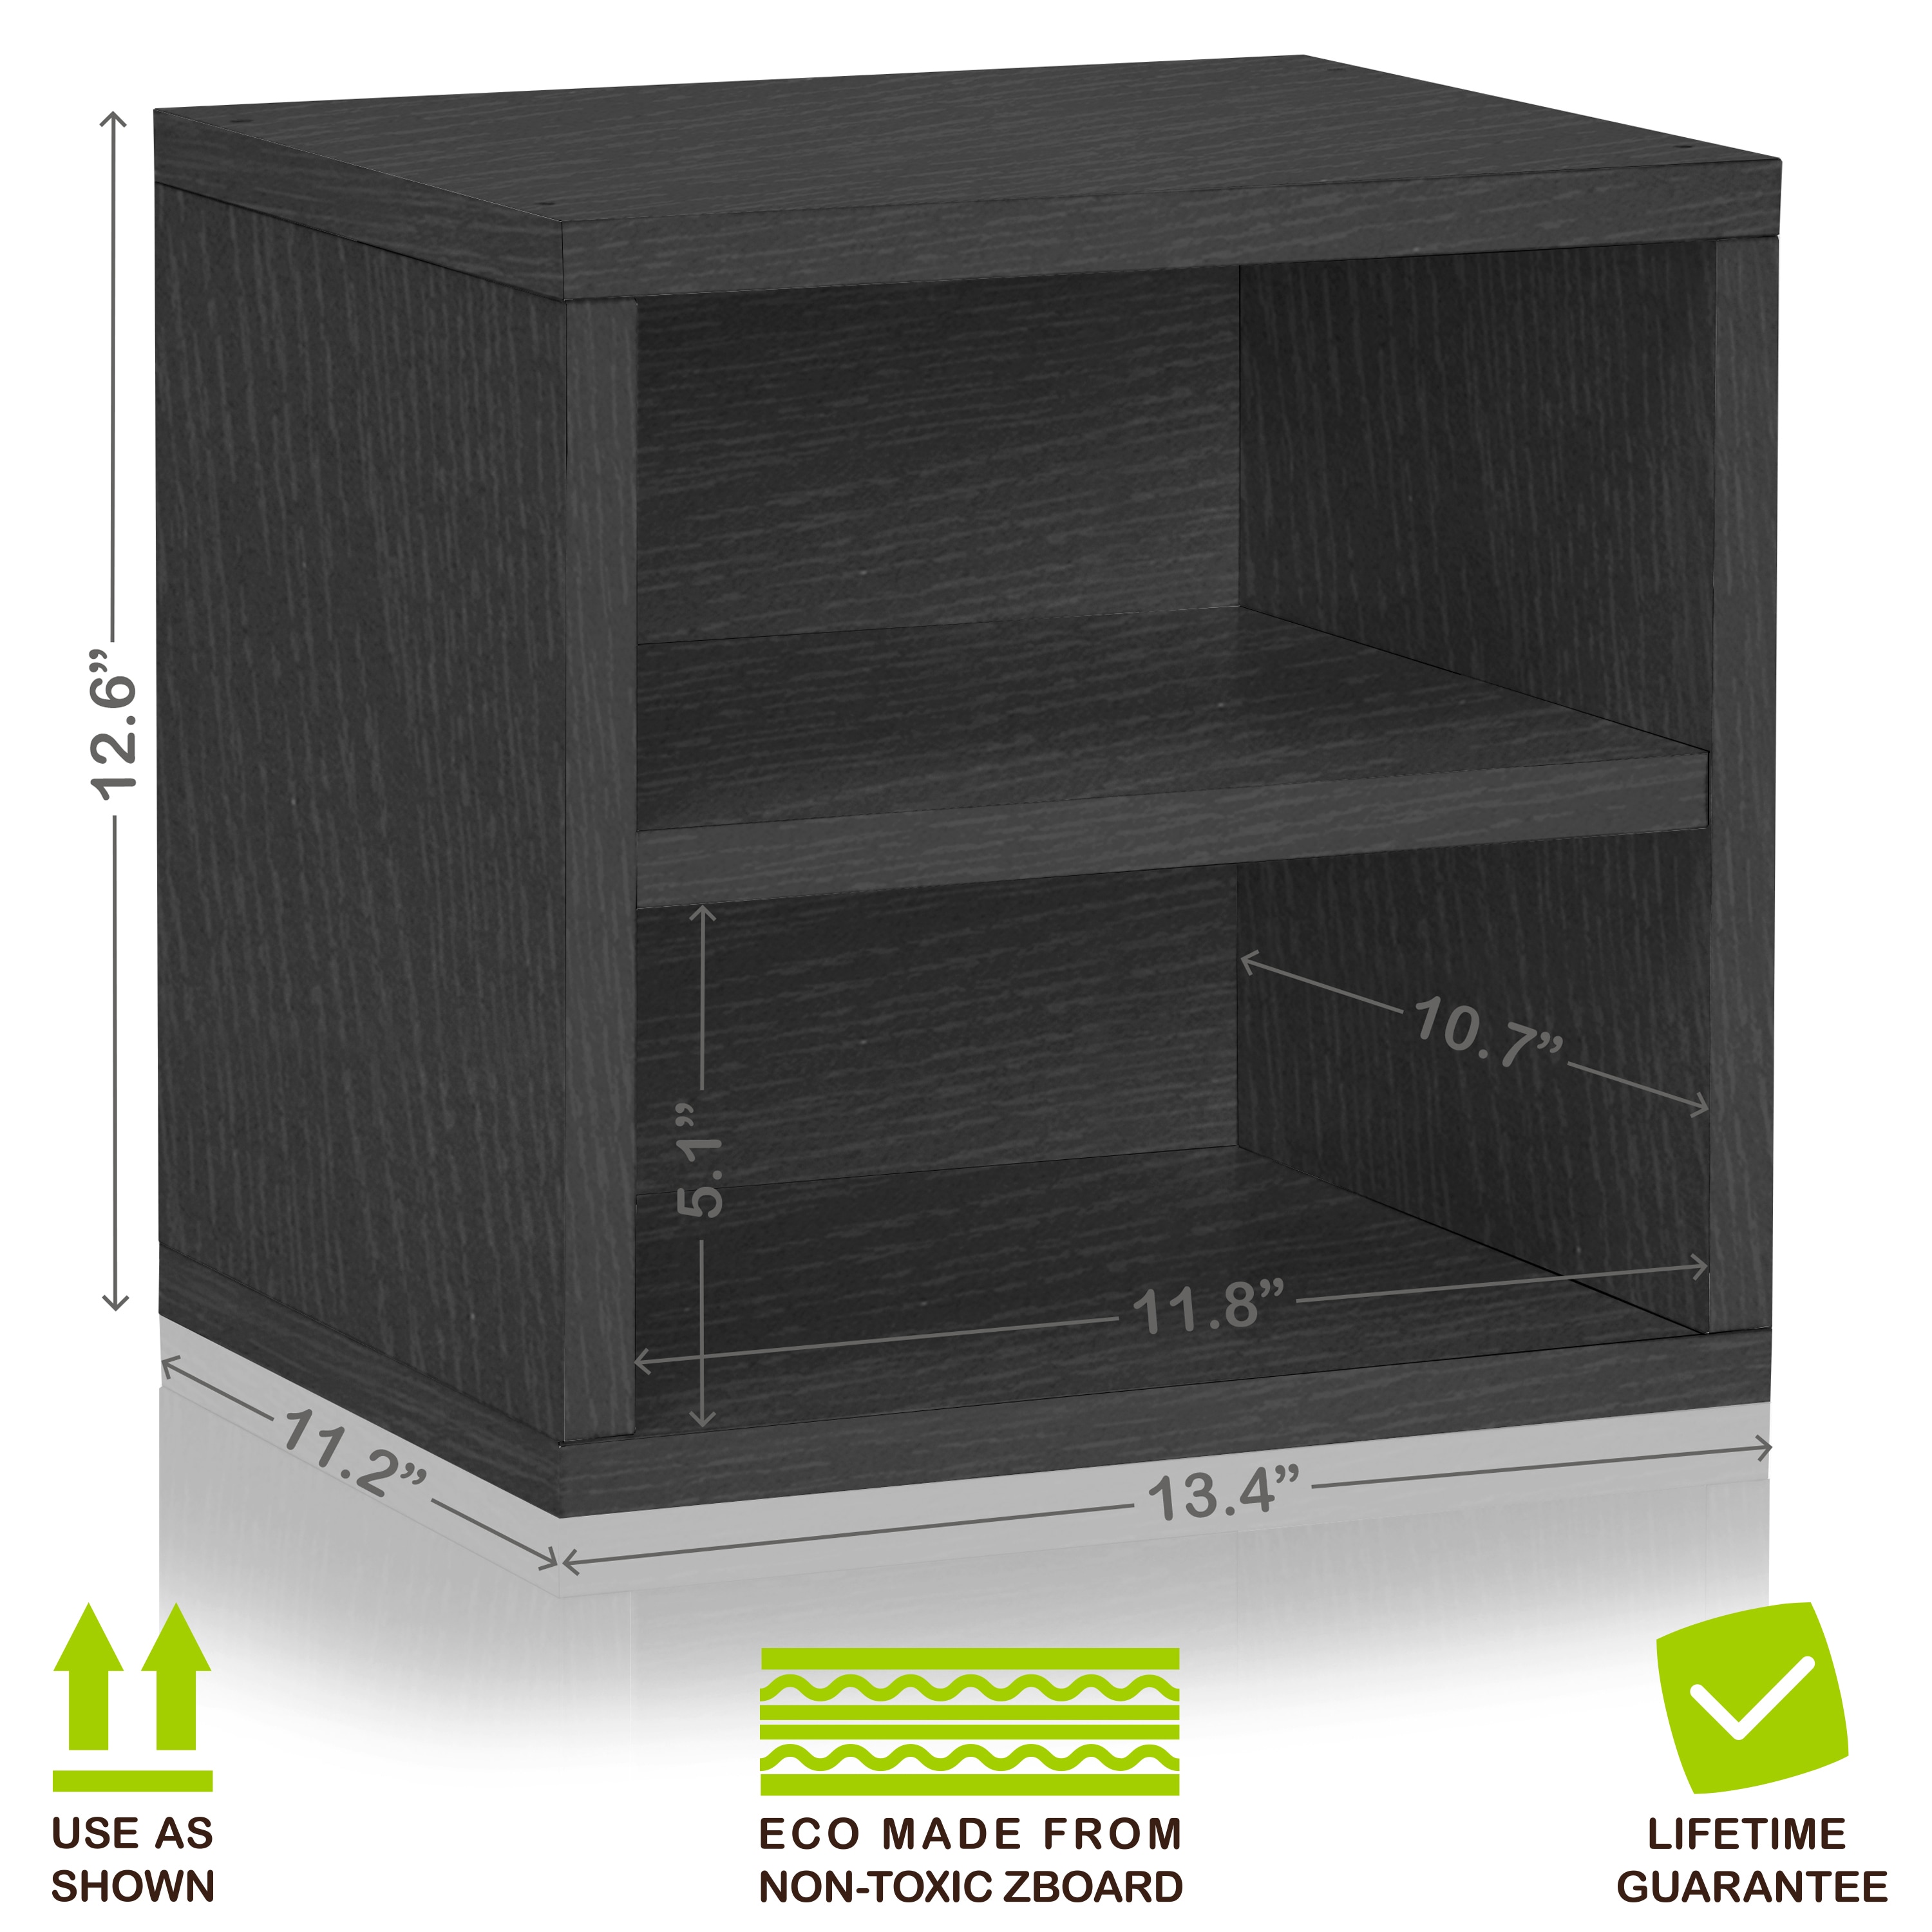 Way Basics 11.2 L x 13.4 W x 12.8 H Eco Stackable Storage Cube and Cubby Organizer Tool-Free Assembly and Uniquely Crafted from Sustainable Non Toxic zBoard paperboard Blue